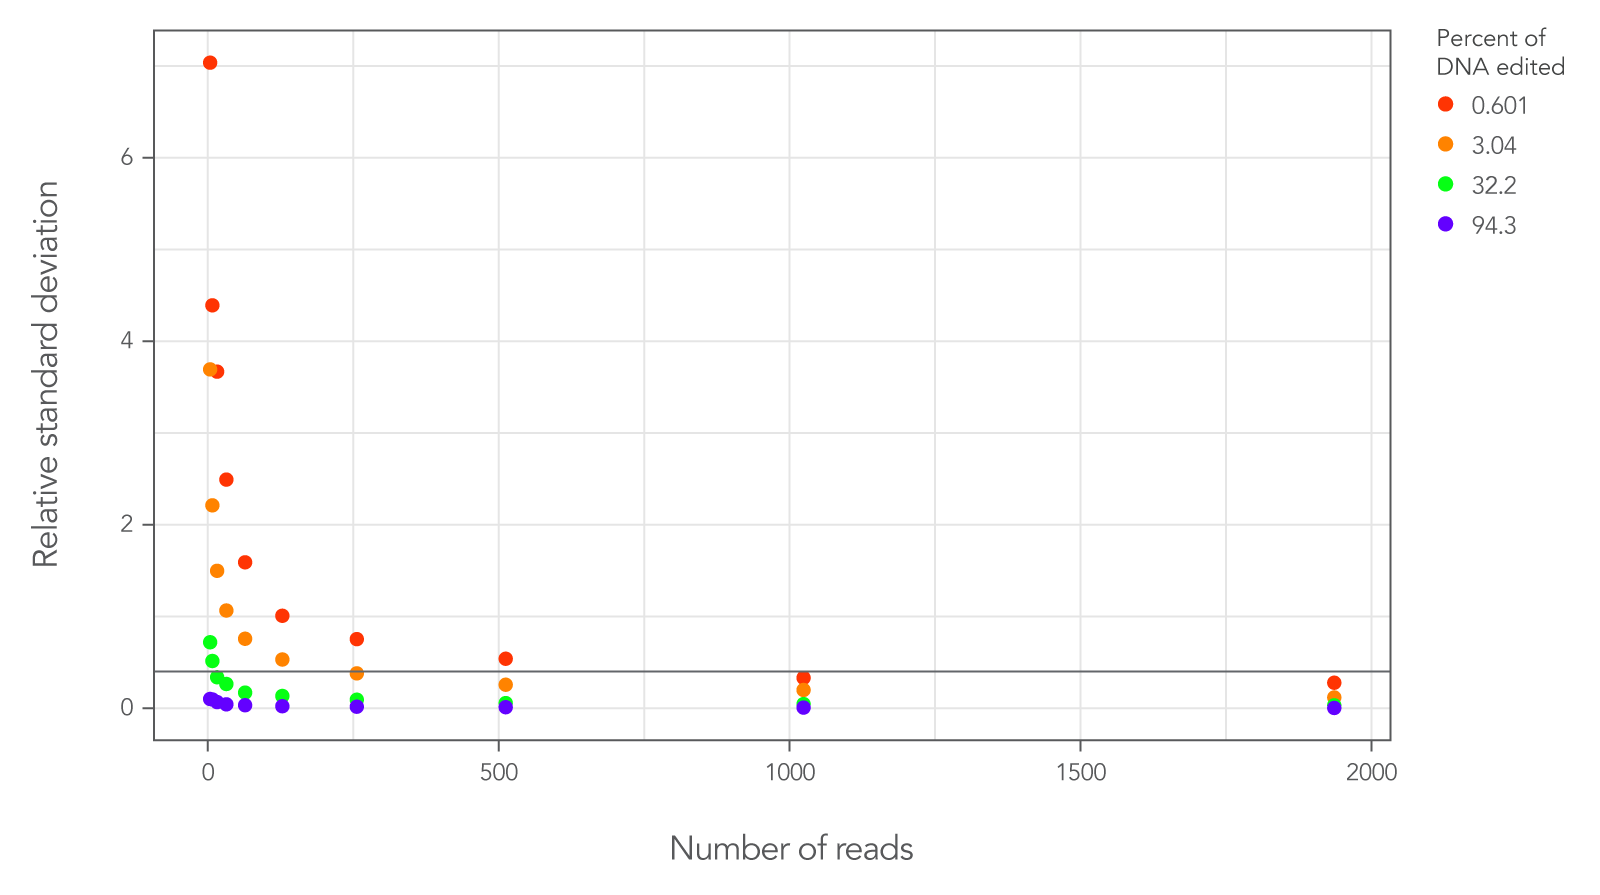 Normalized standard deviation in true editing levels decrease as the number of reads increases